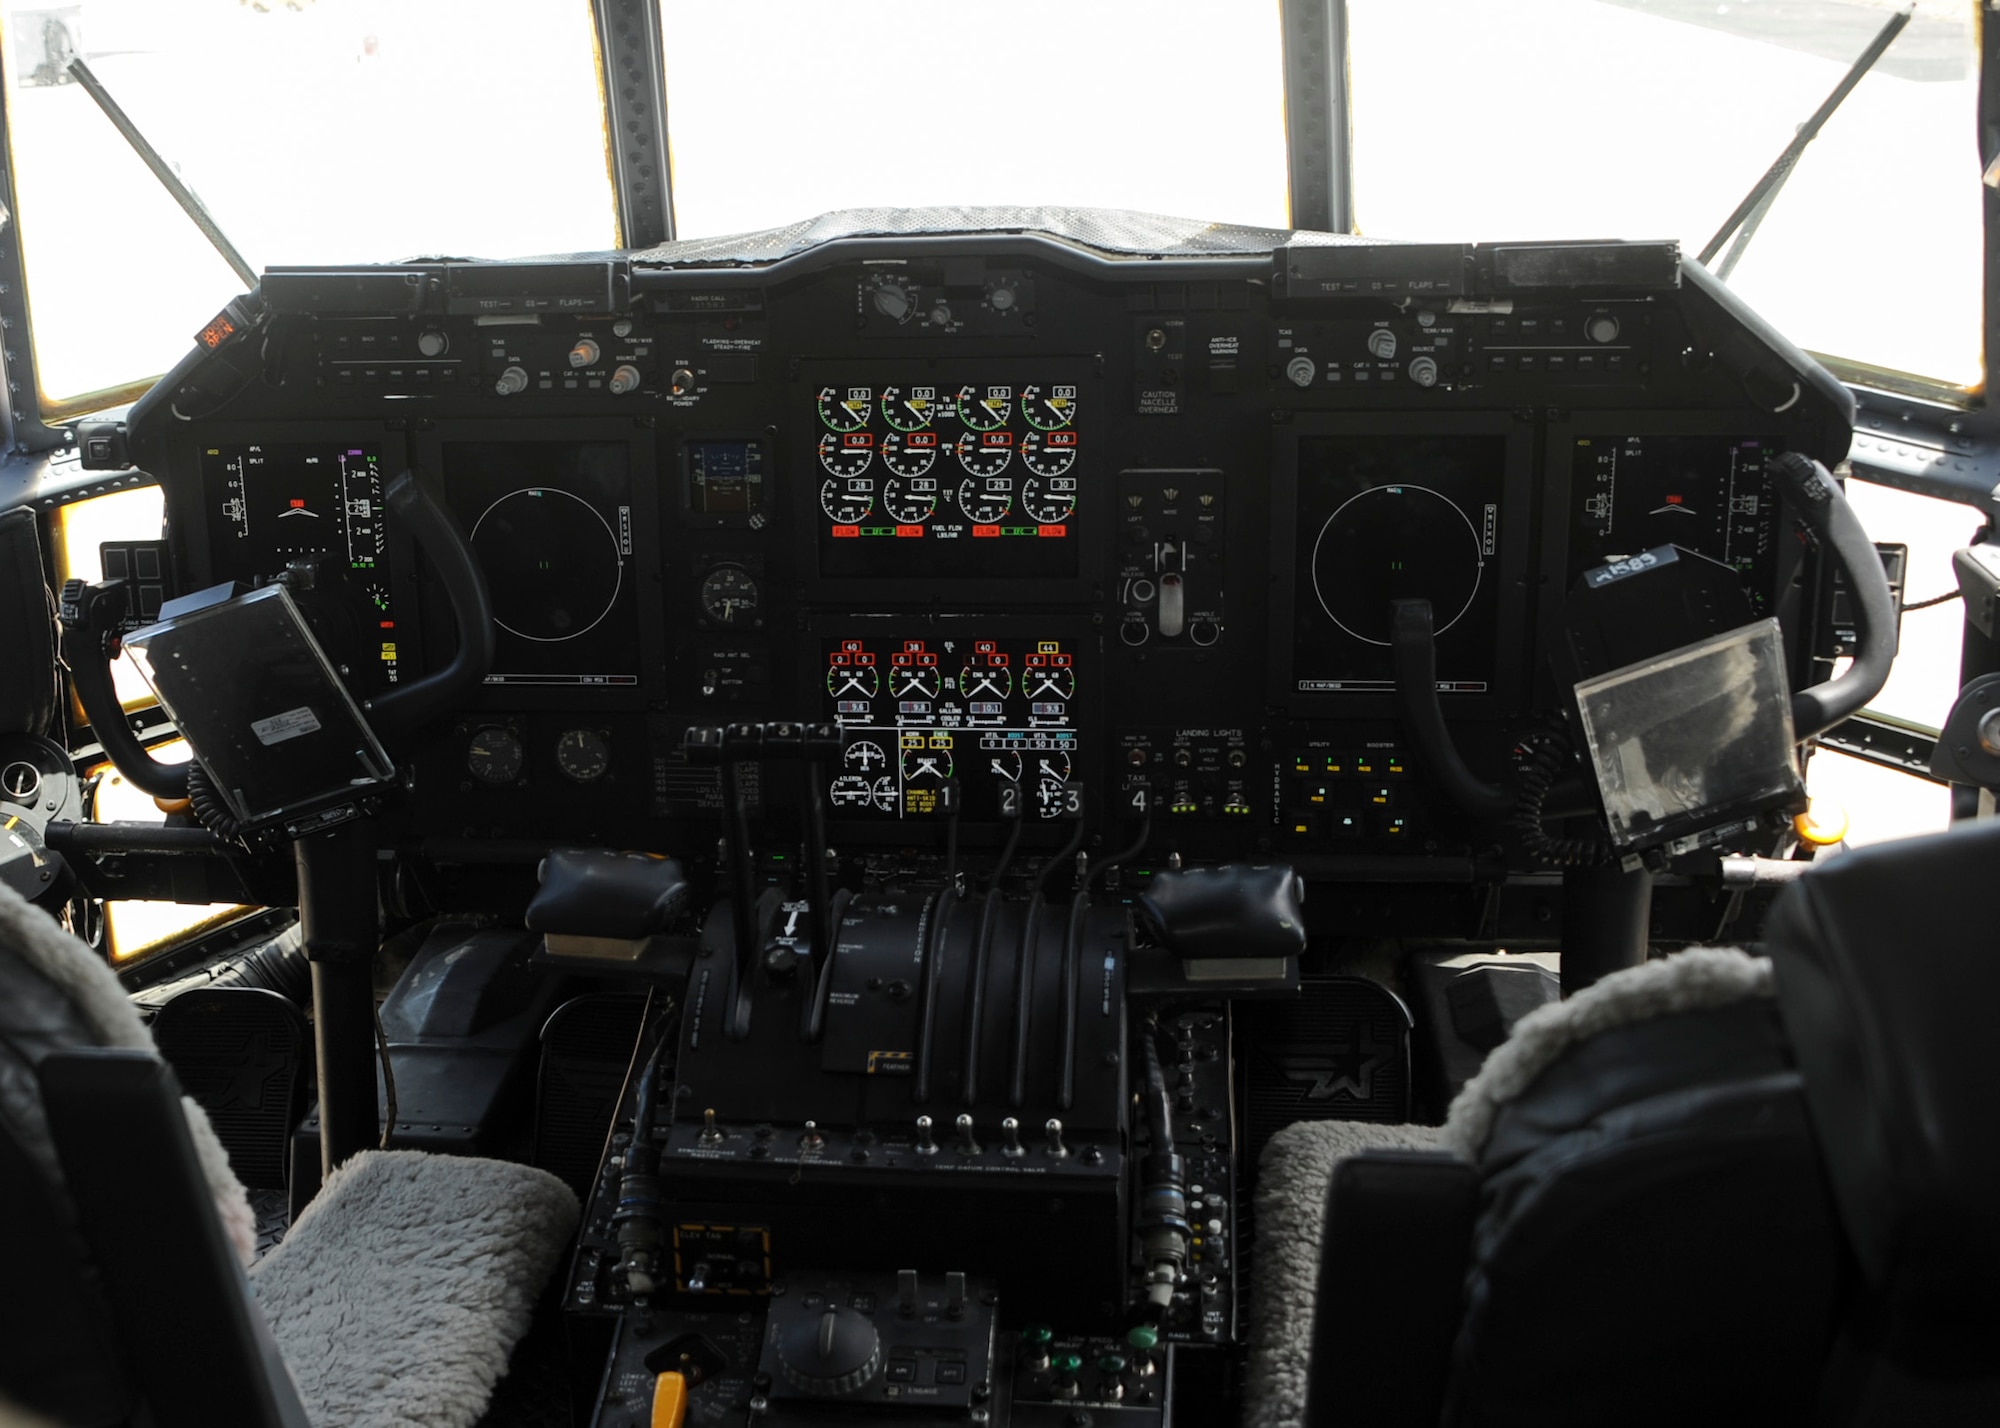 A cockpit upgraded via an avionic viability is powered on for demonstration in an EC-130H Compass Call at Davis-Monthan Air Force Base, Ariz., July 19, 2016. The upgrade revitalizes the cockpit with liquid crystal displays that consolidate vital flight information such as precision ground mapping. (U.S. Air Force photo by Airman Nathan H. Barbour/Released)